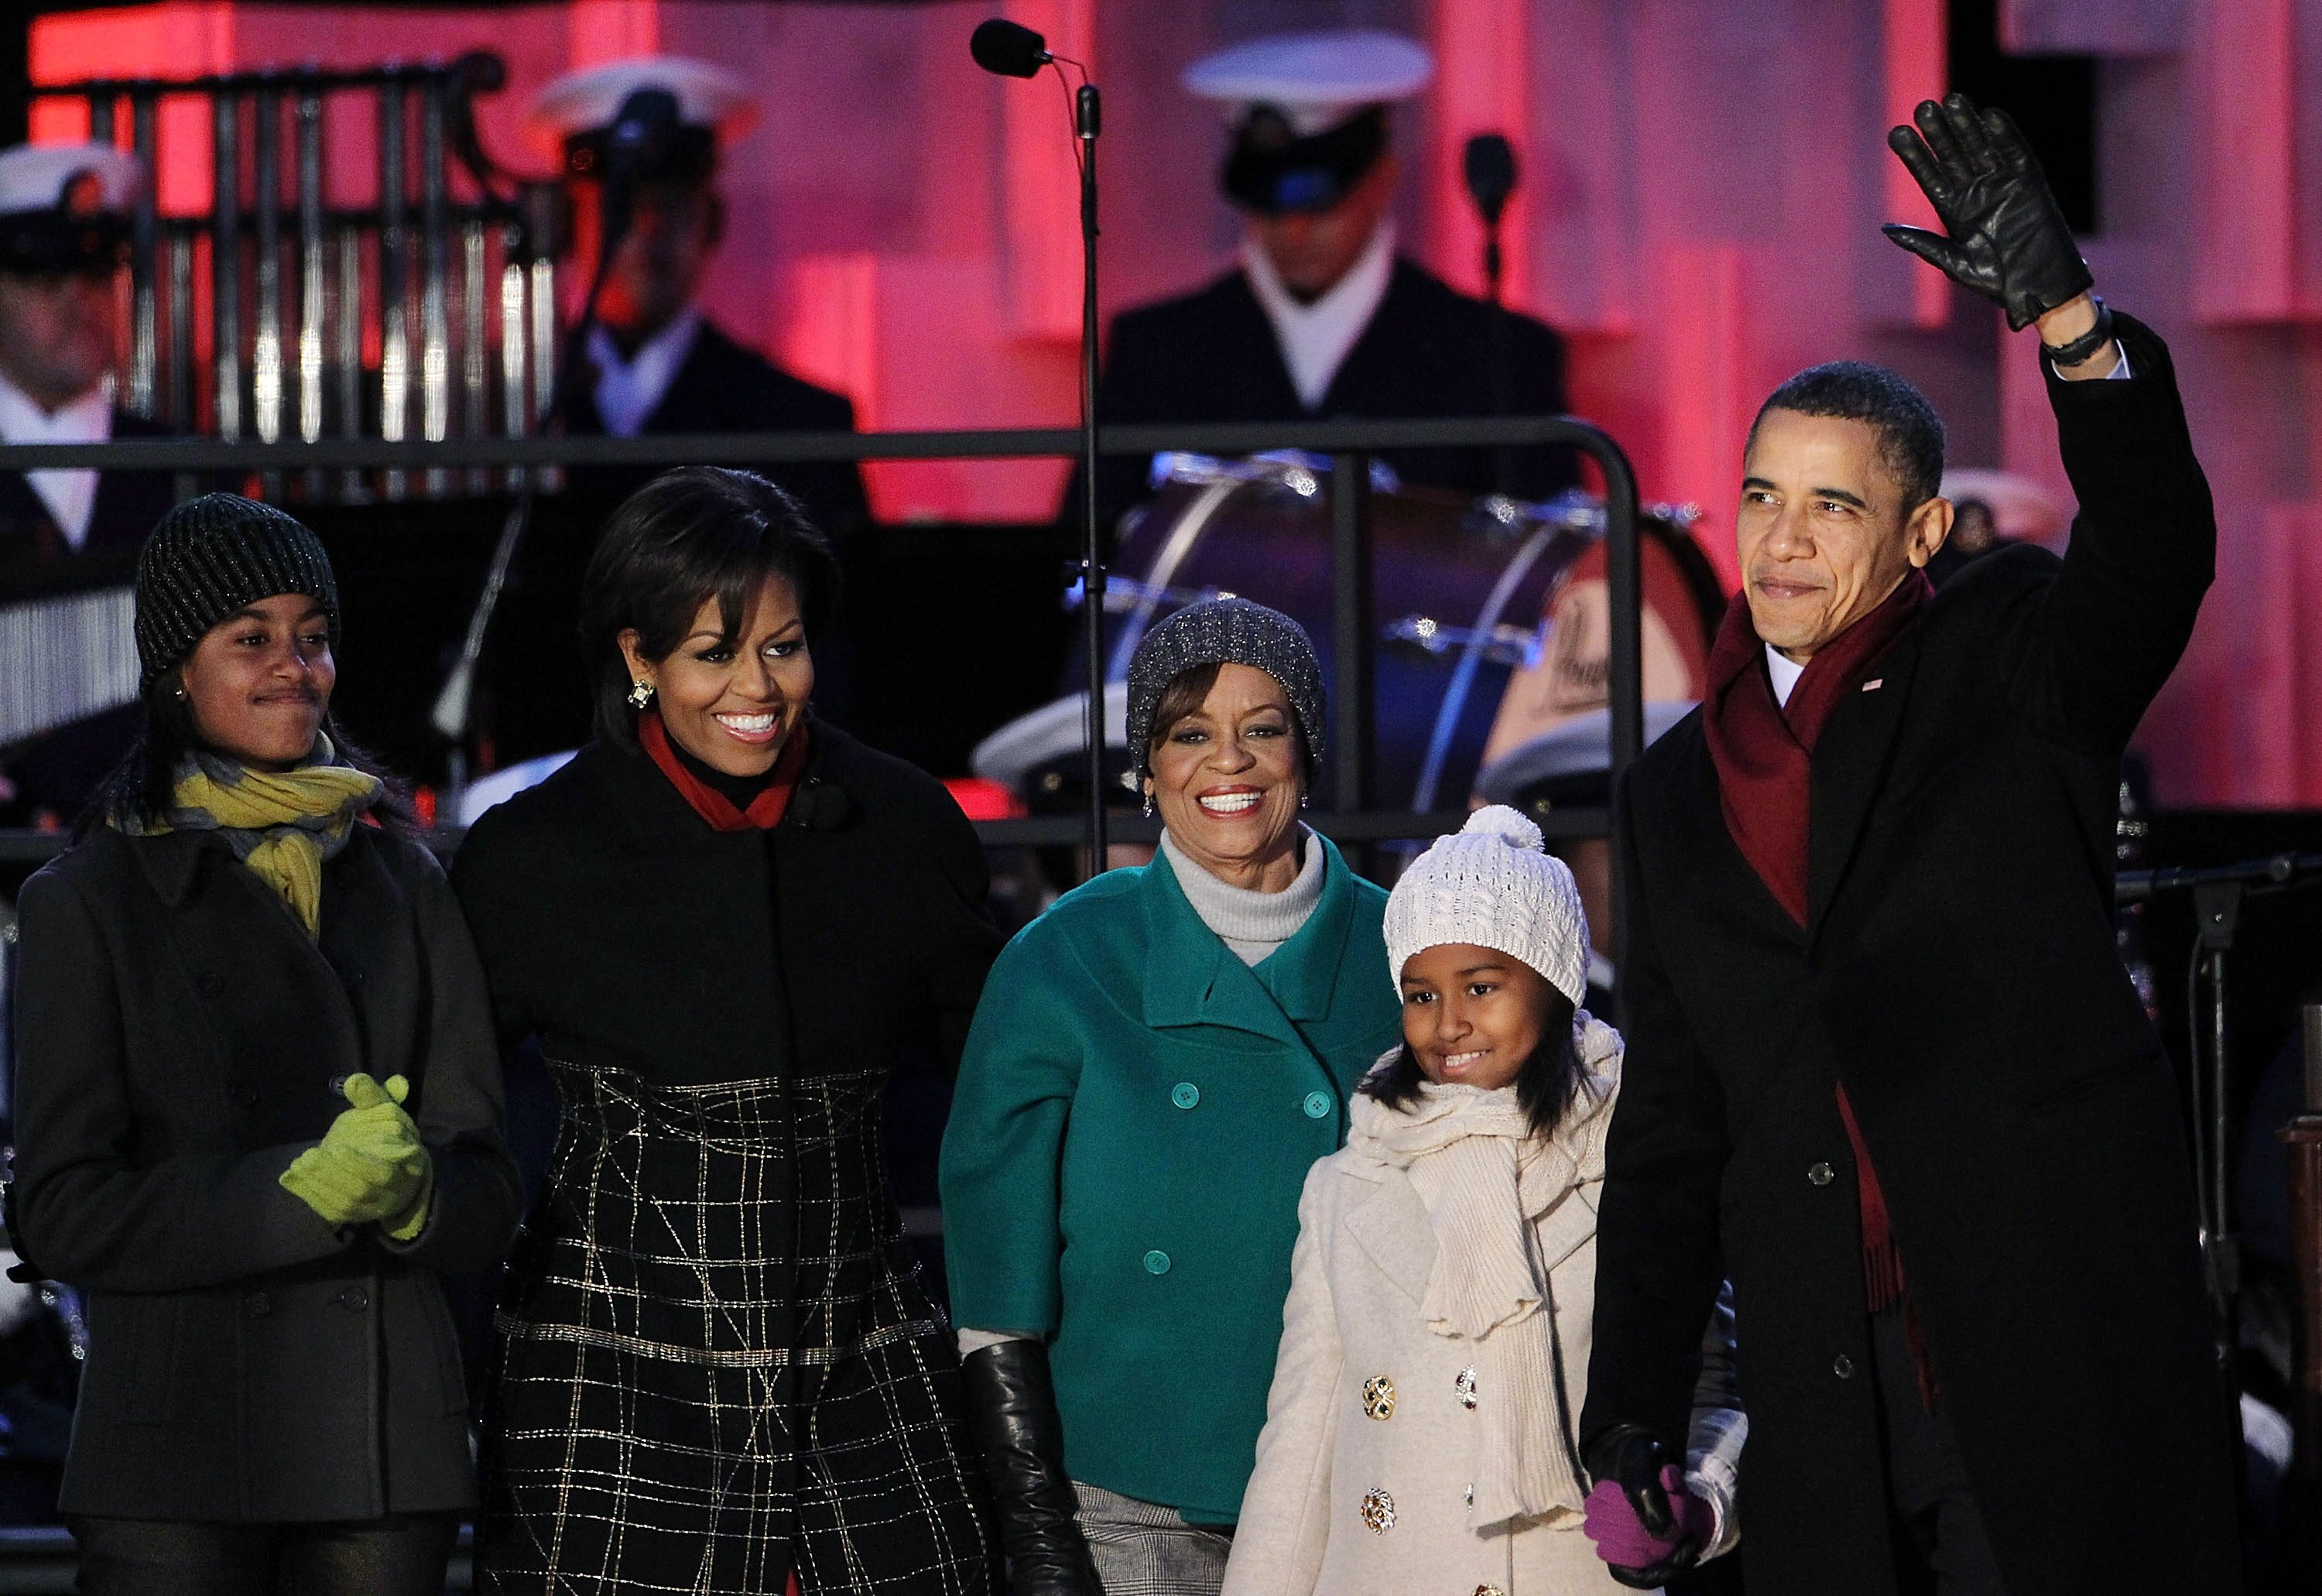 Barack Obama, his daughters Sasha and Malia, mother-in-law Marian Robinson, and Michelle Obama at the National Christmas Tree lighting ceremony on December 9, 2010 | Photo: Getty Images